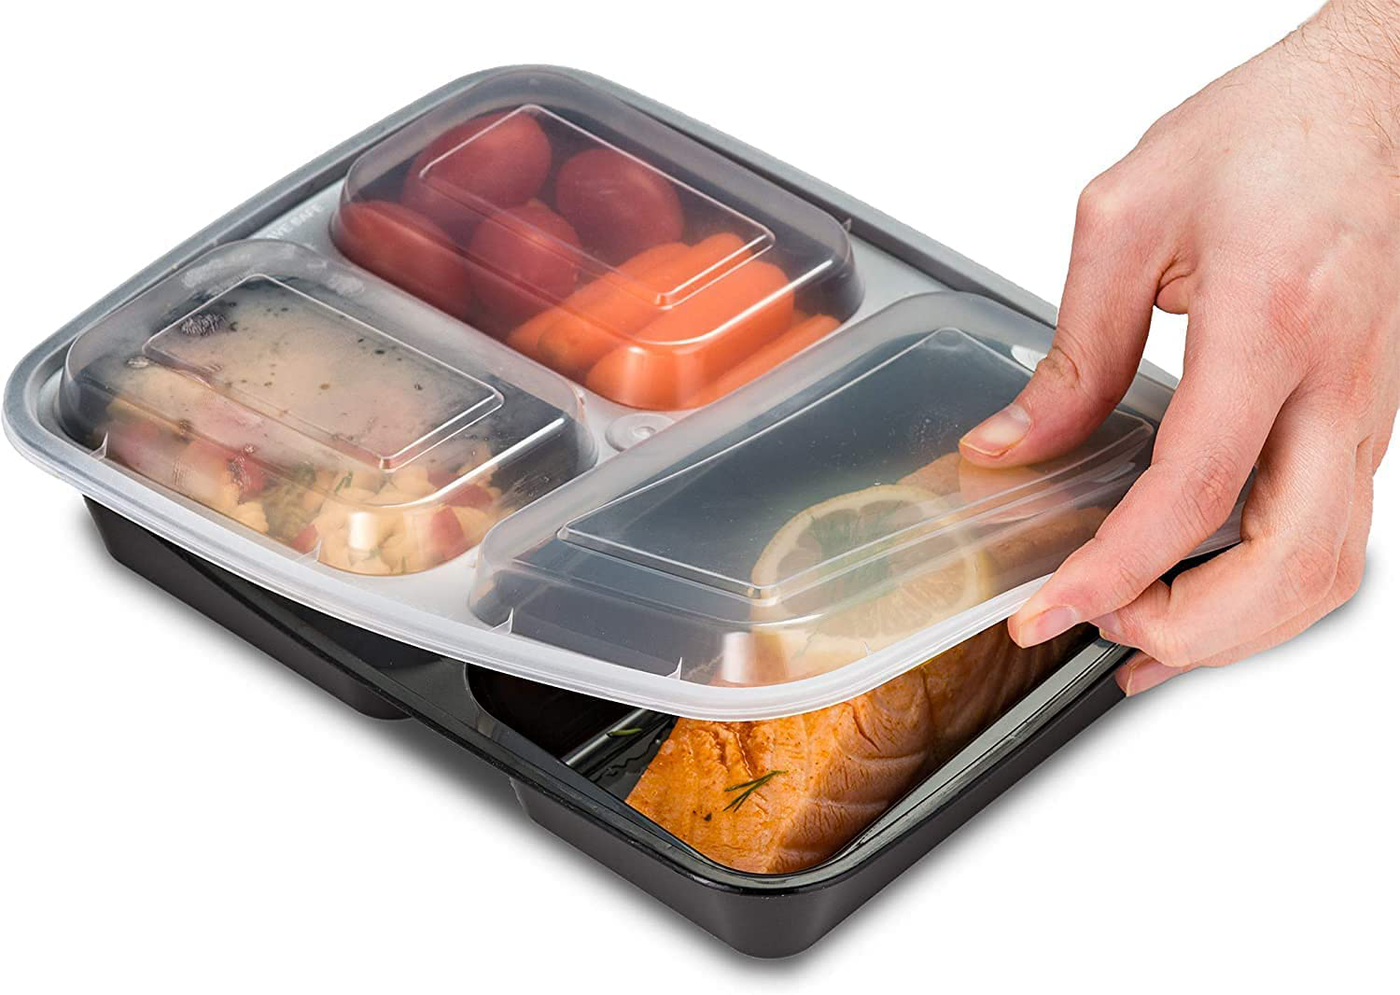 EZ Prepa [20 Pack] 32oz 3 Compartment Meal Prep Containers with Lids - Bento Box